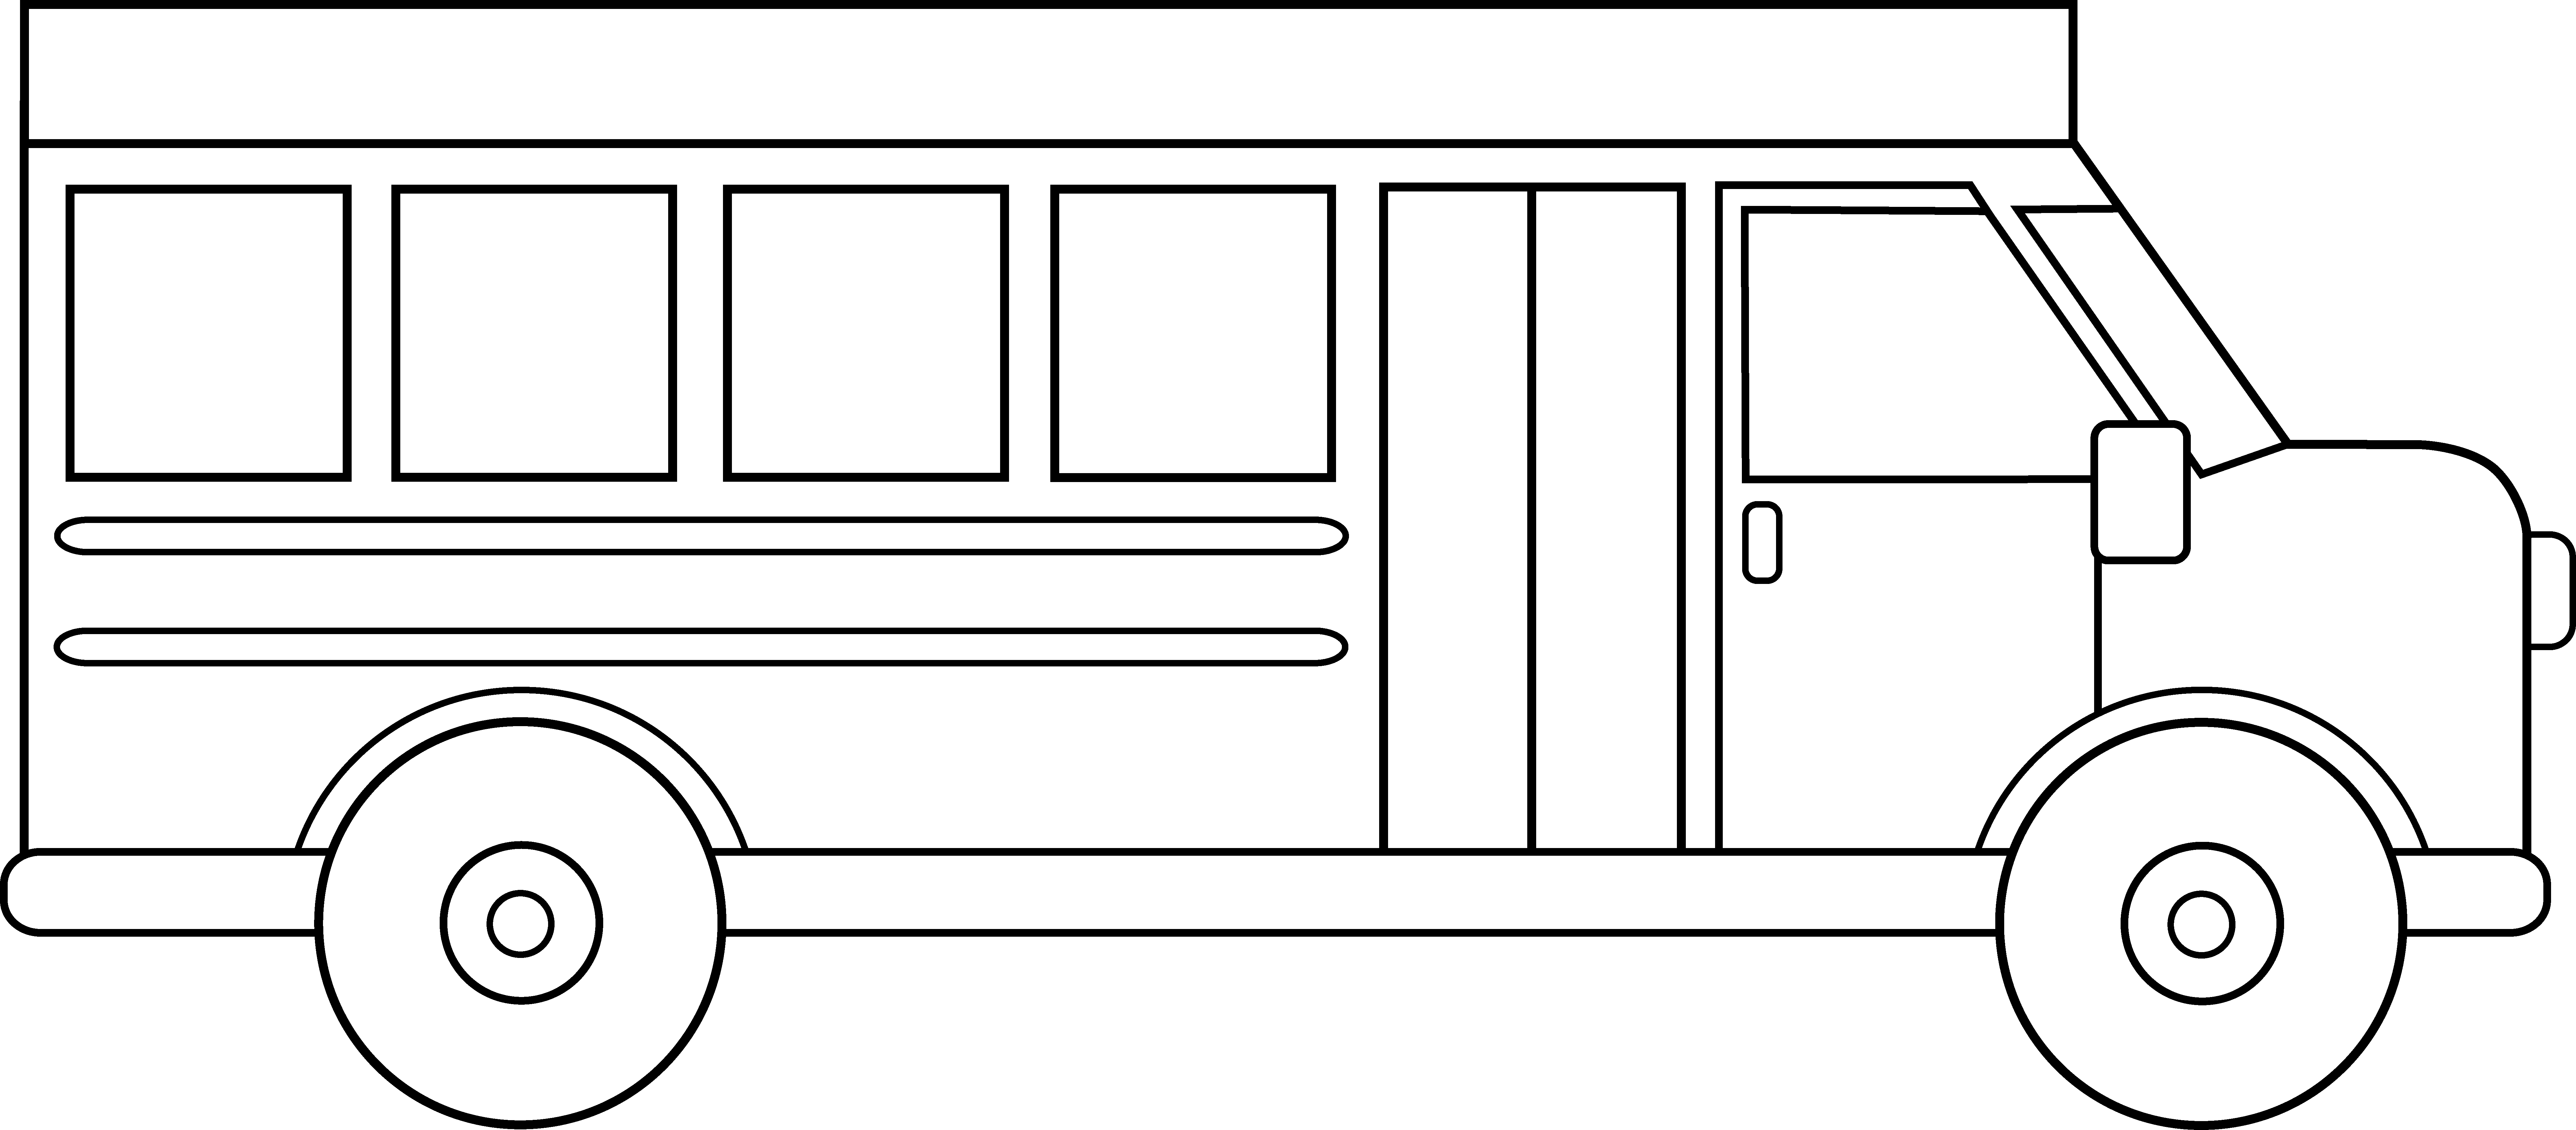 School Bus Outline Black And White Images  Pictures - Becuo